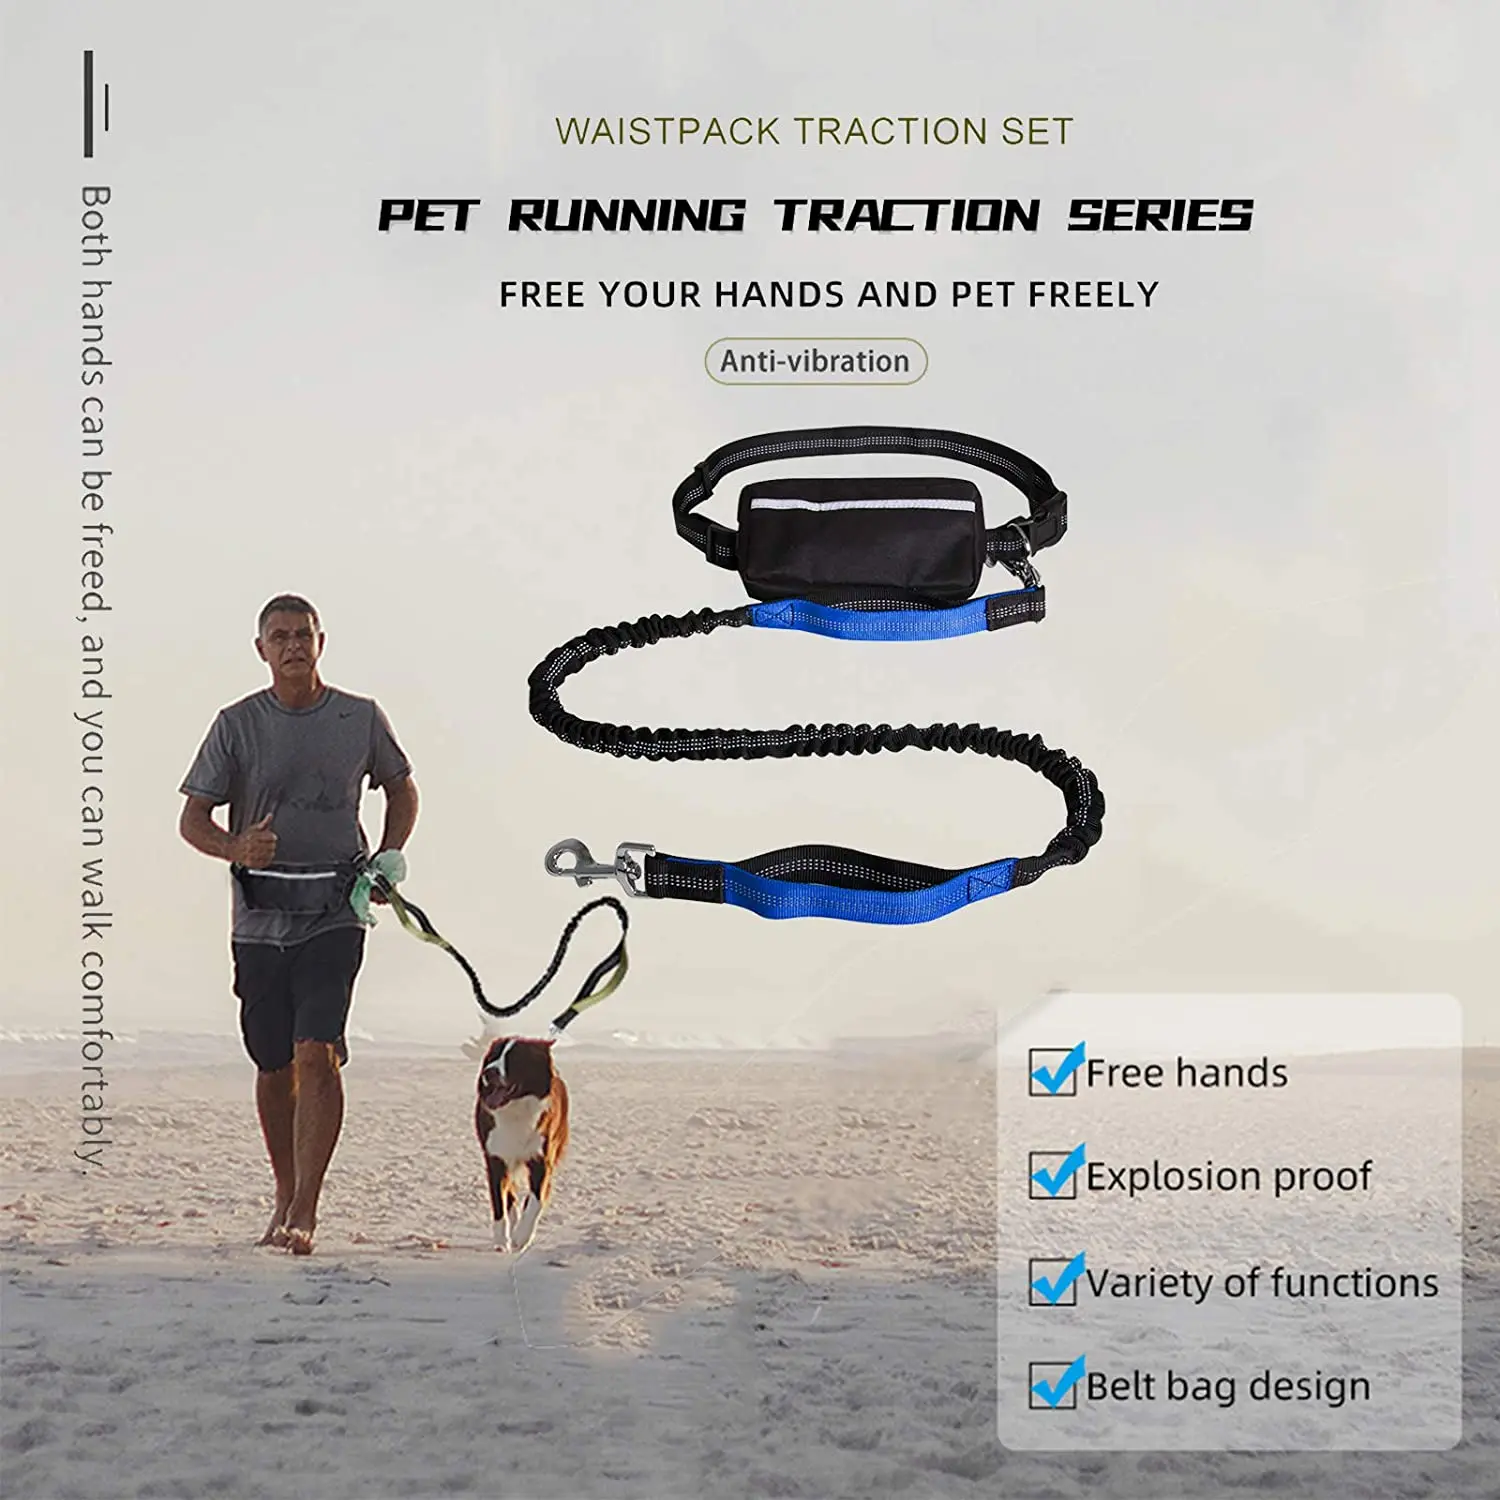 

Retractable Elastic Pet Running Hands Free Nylon Dog Leash-Detachable Pouch Adjustable Waist Leashes Traction Belt Rope Jogging